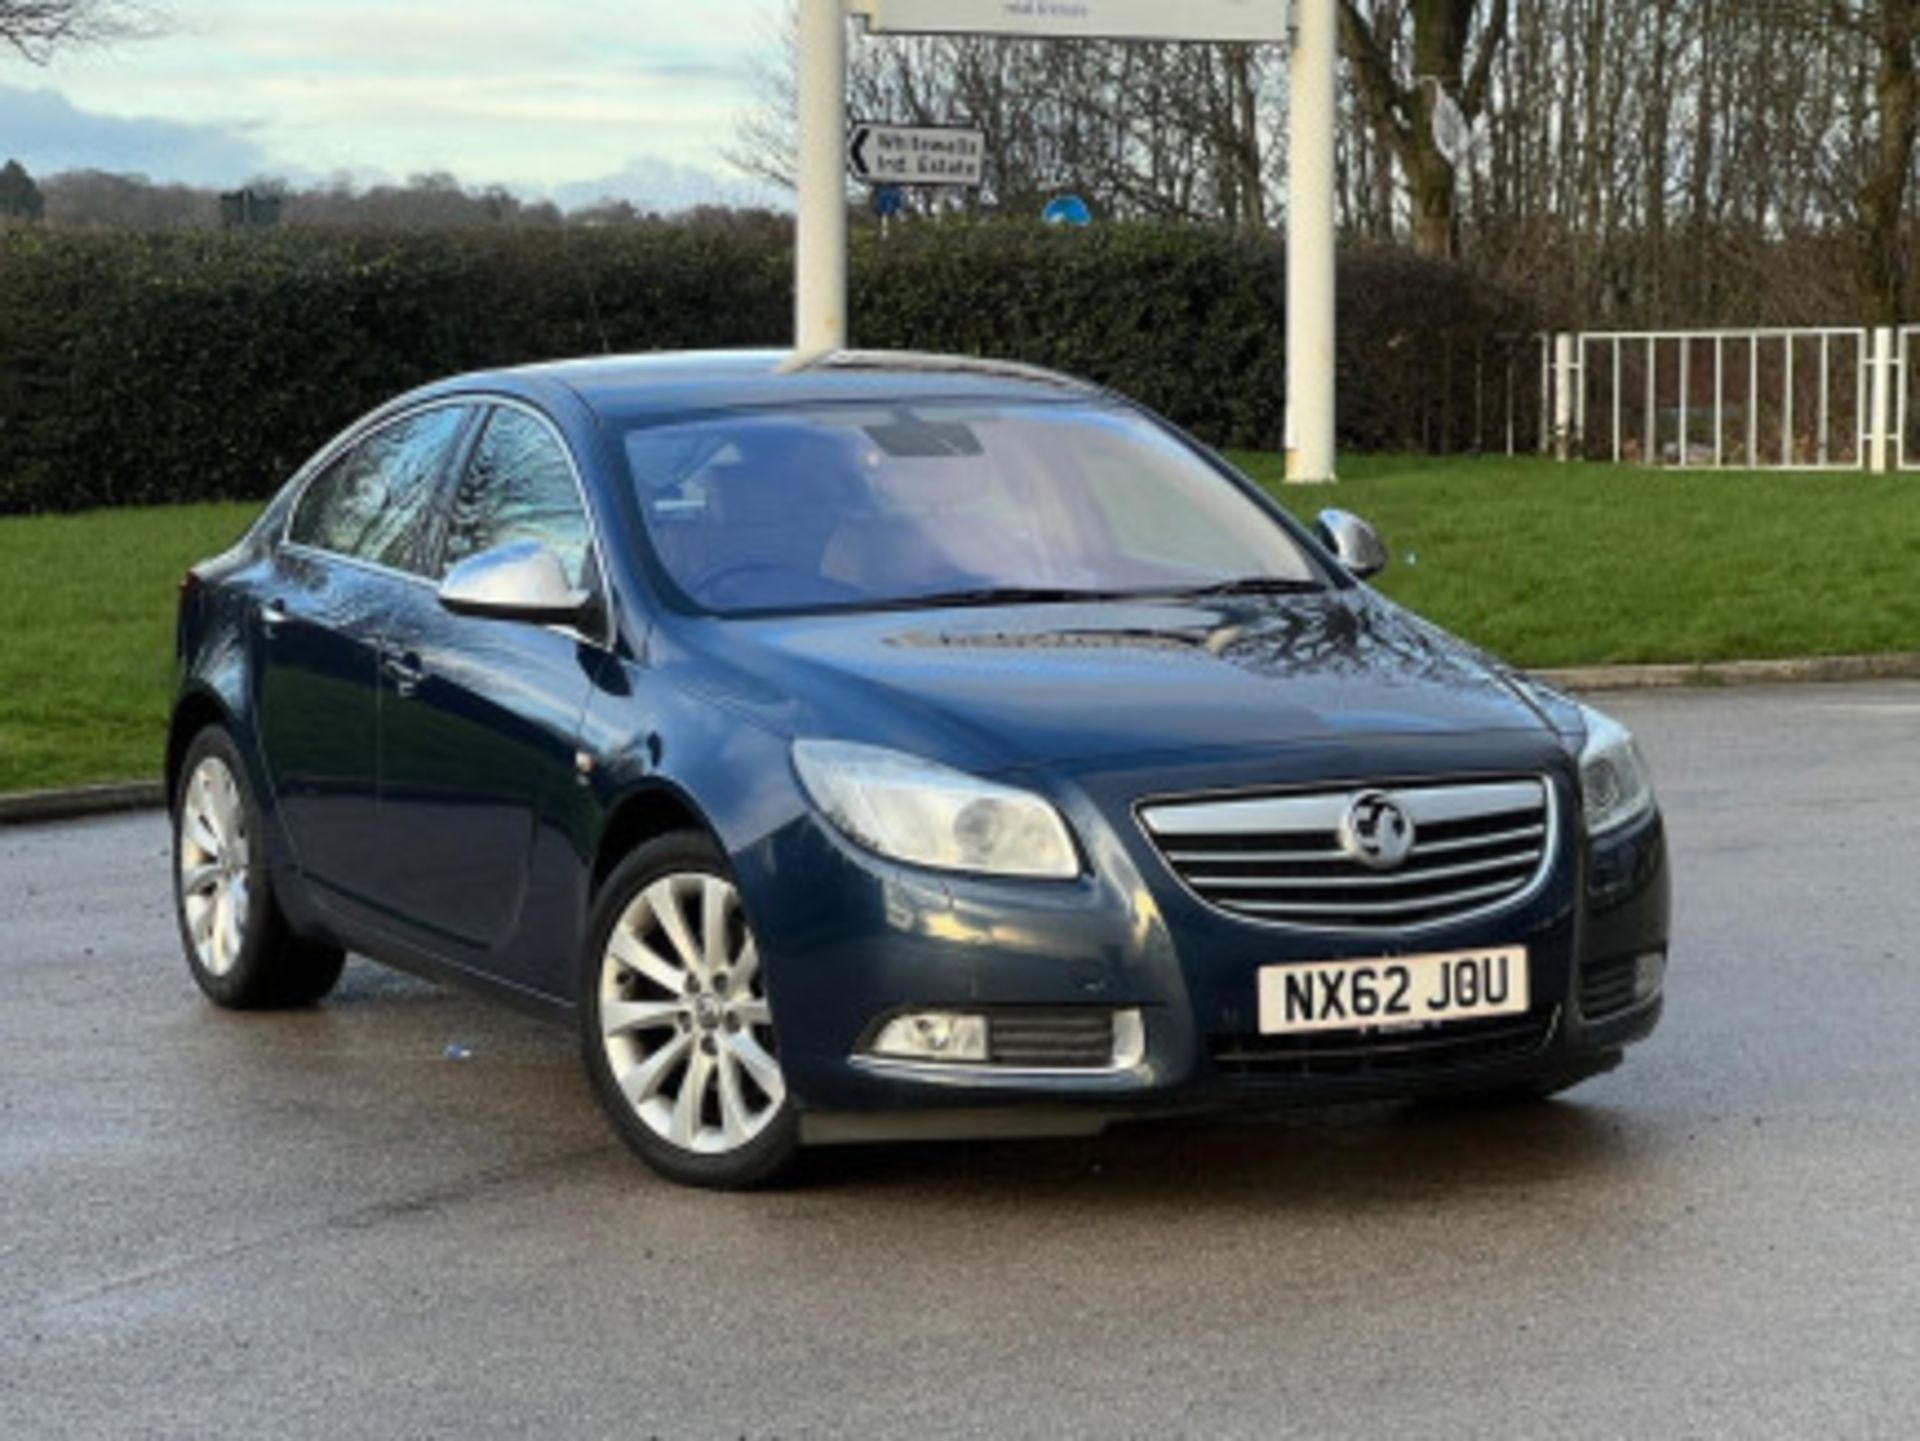 2012 VAUXHALL INSIGNIA 2.0 CDTI ELITE AUTO EURO 5 - DISCOVER EXCELLENCE >>--NO VAT ON HAMMER--<<